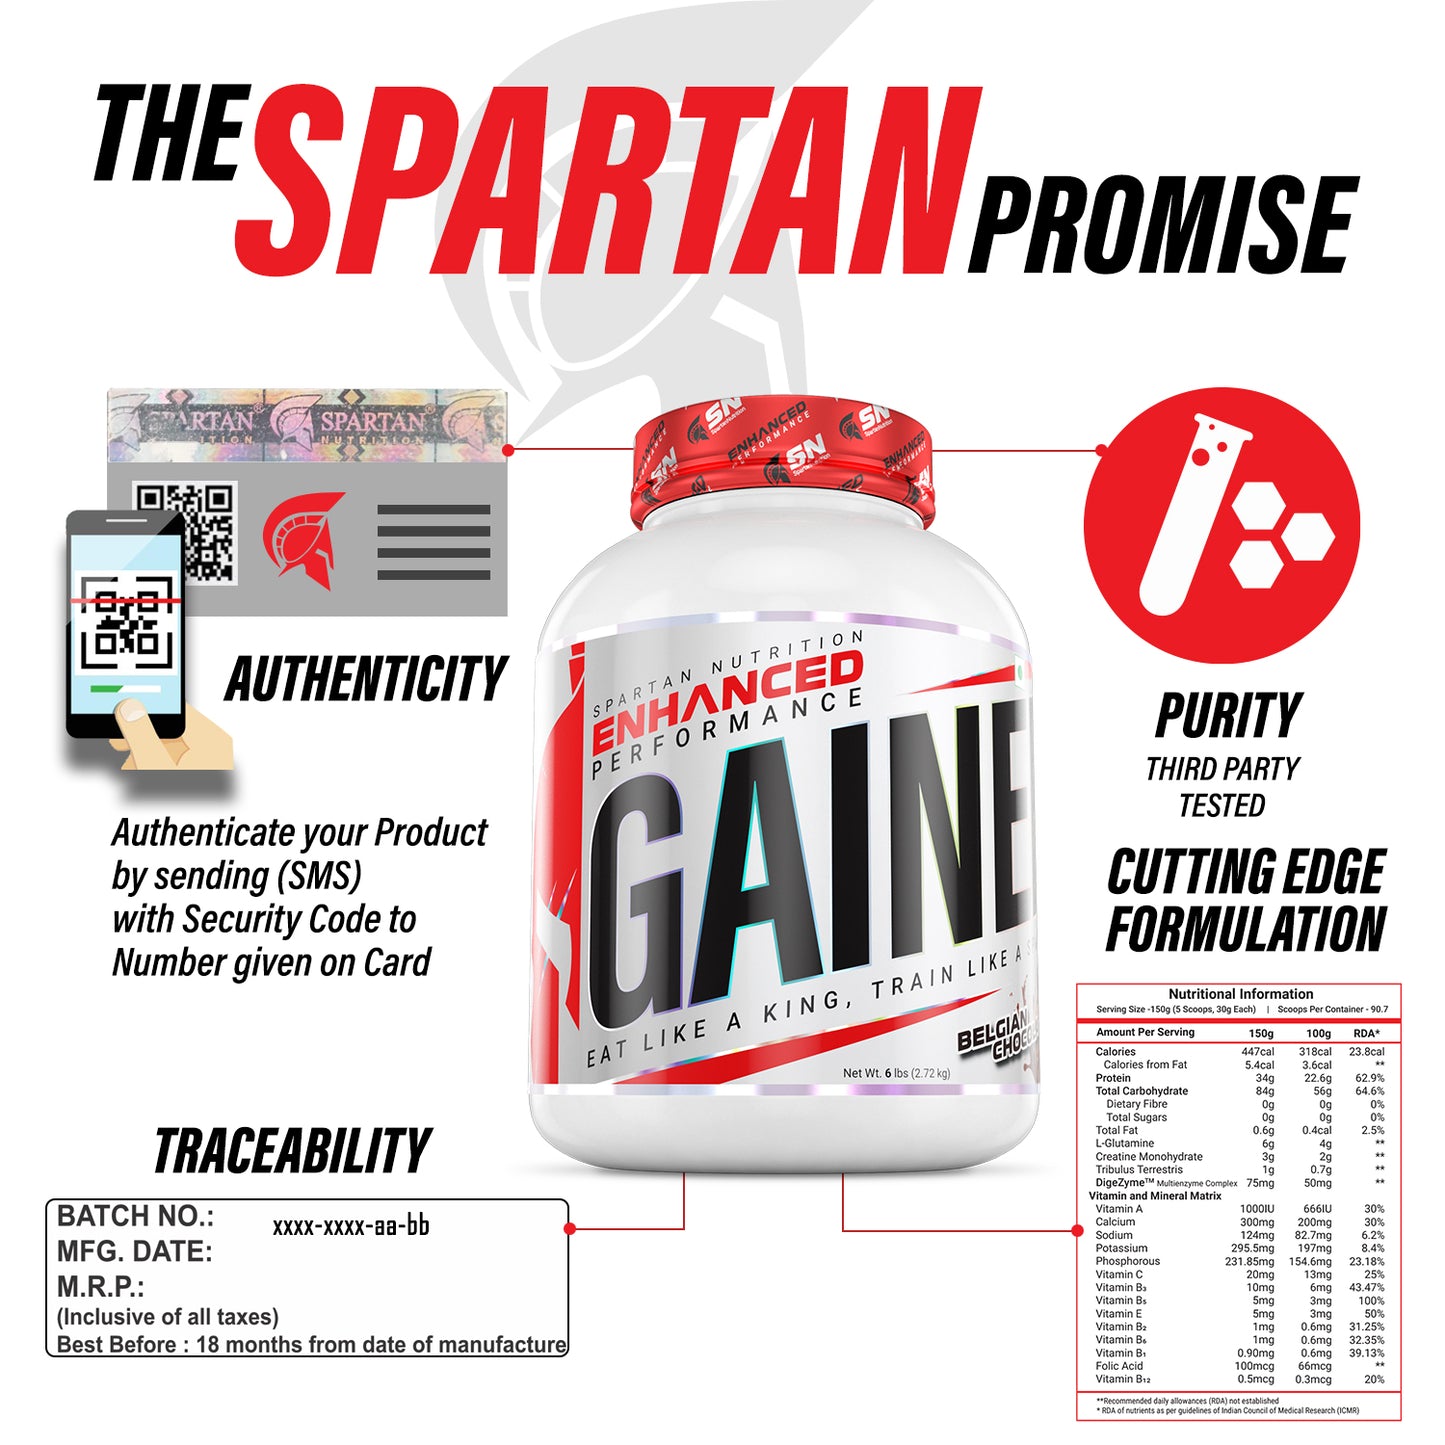 Spartan Nutrition Enhanced Performance Gainer High Protein and High Calorie with L-Glutamine and Creatine Monohydrate, Mass Gainer / Weight Gainer Powder – 6lbs, 2.72KG